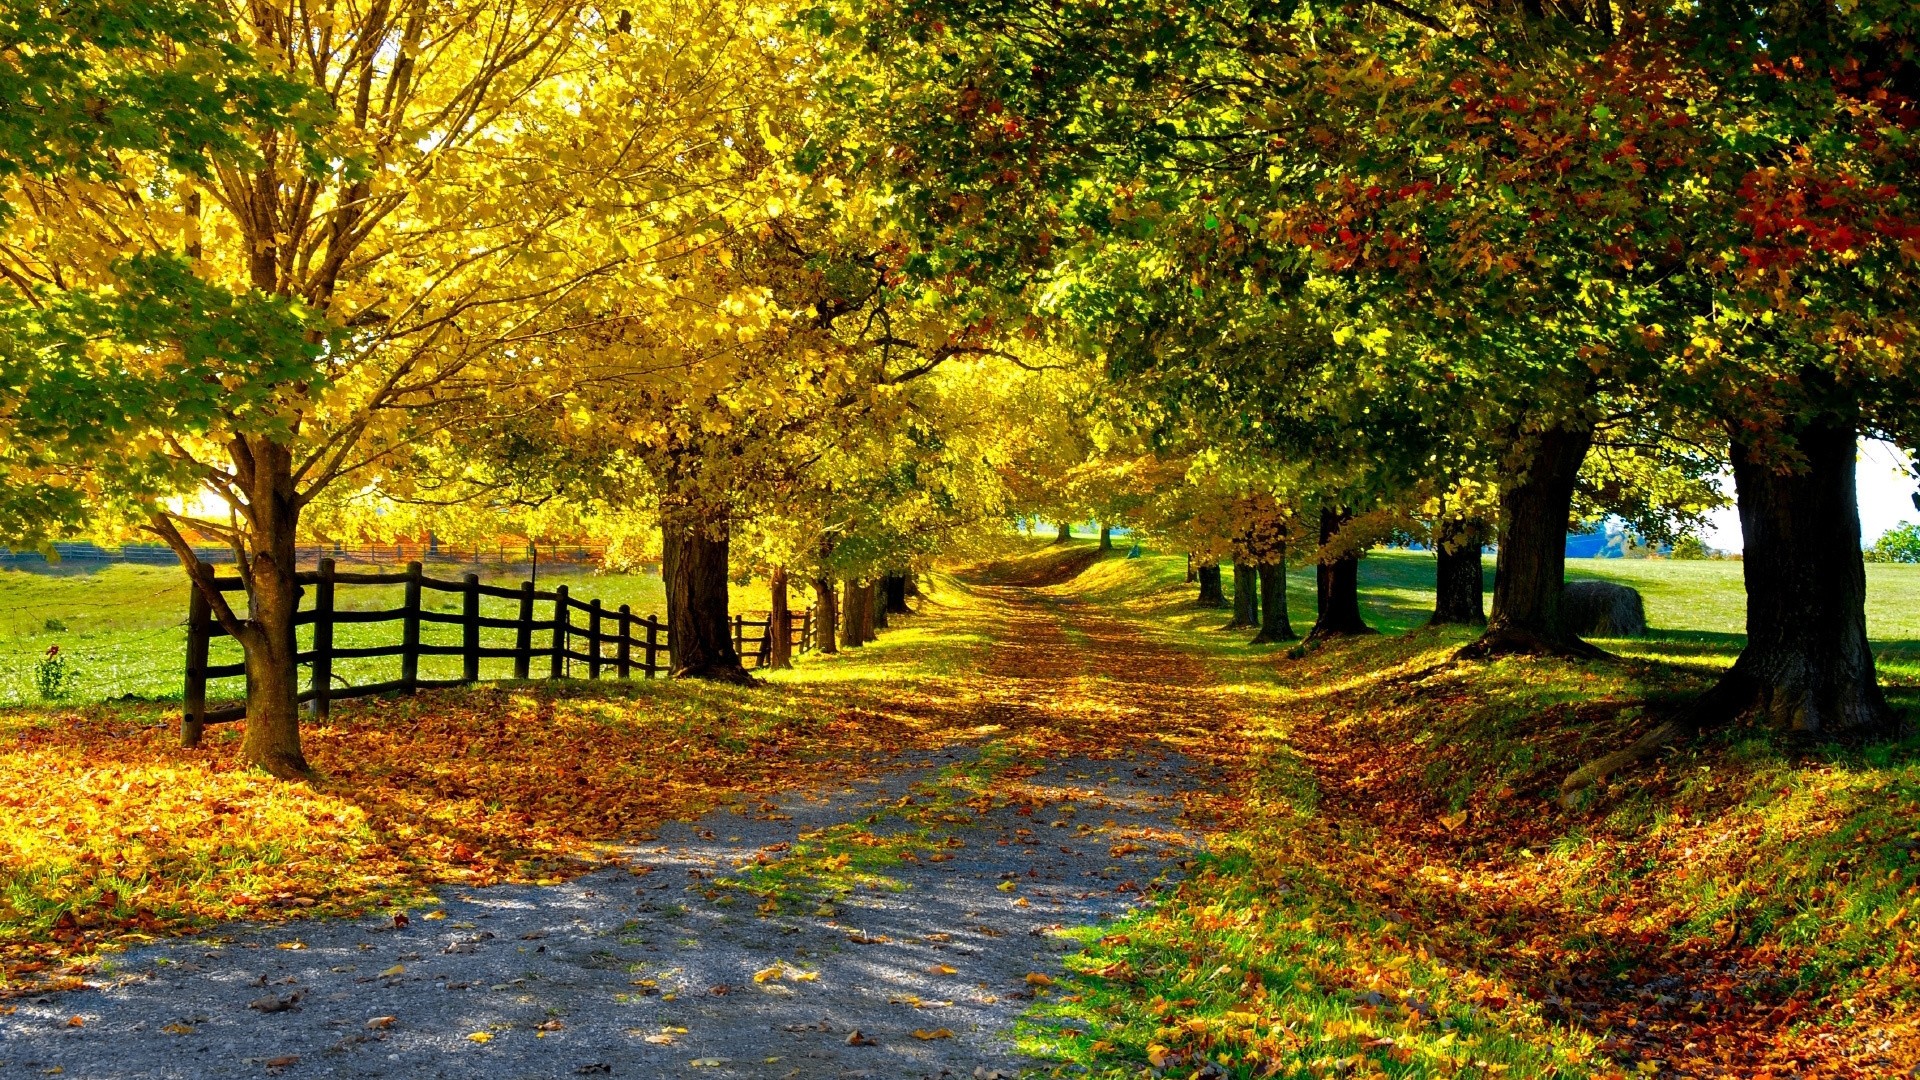 General 1920x1080 leaves outdoors fall dirt road dappled sunlight fence fallen leaves calm nature trees yellow idyllic